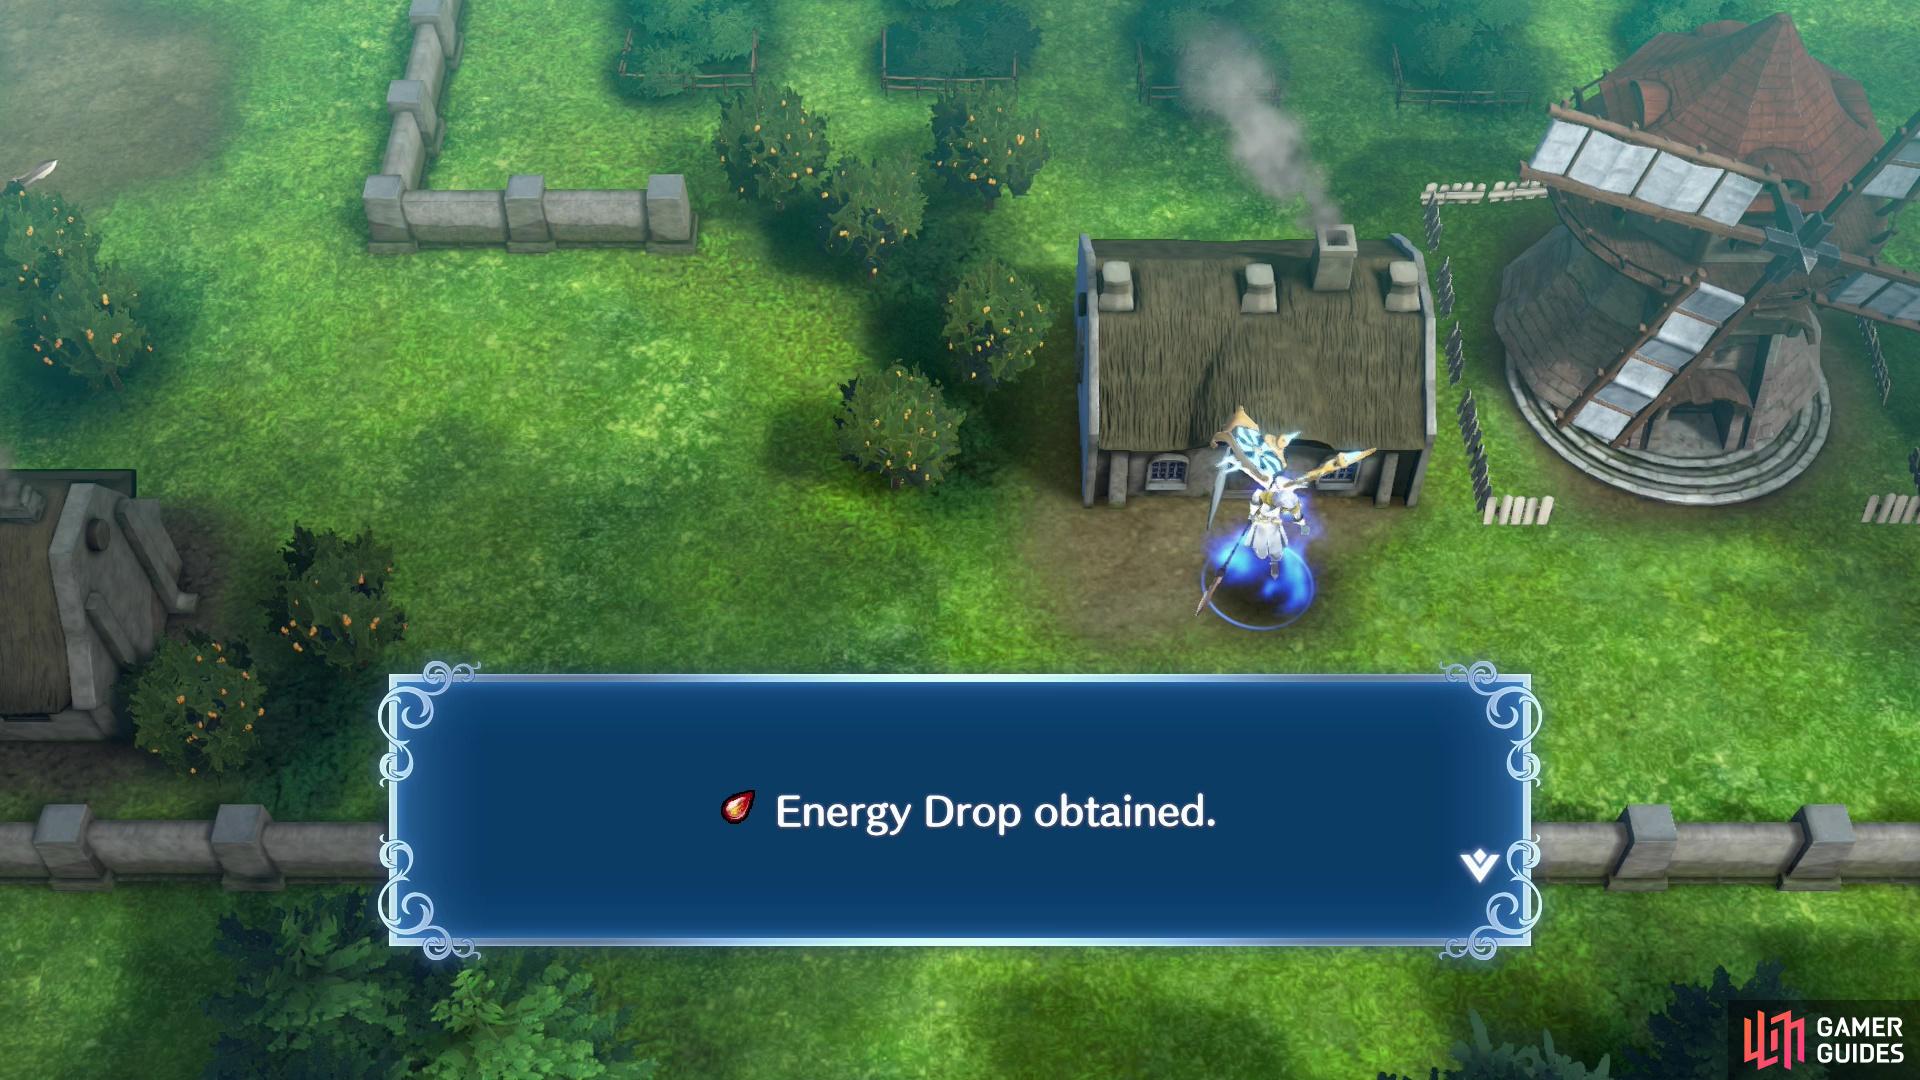 If you make it to the eastern house, you'll score an Energy Drop.